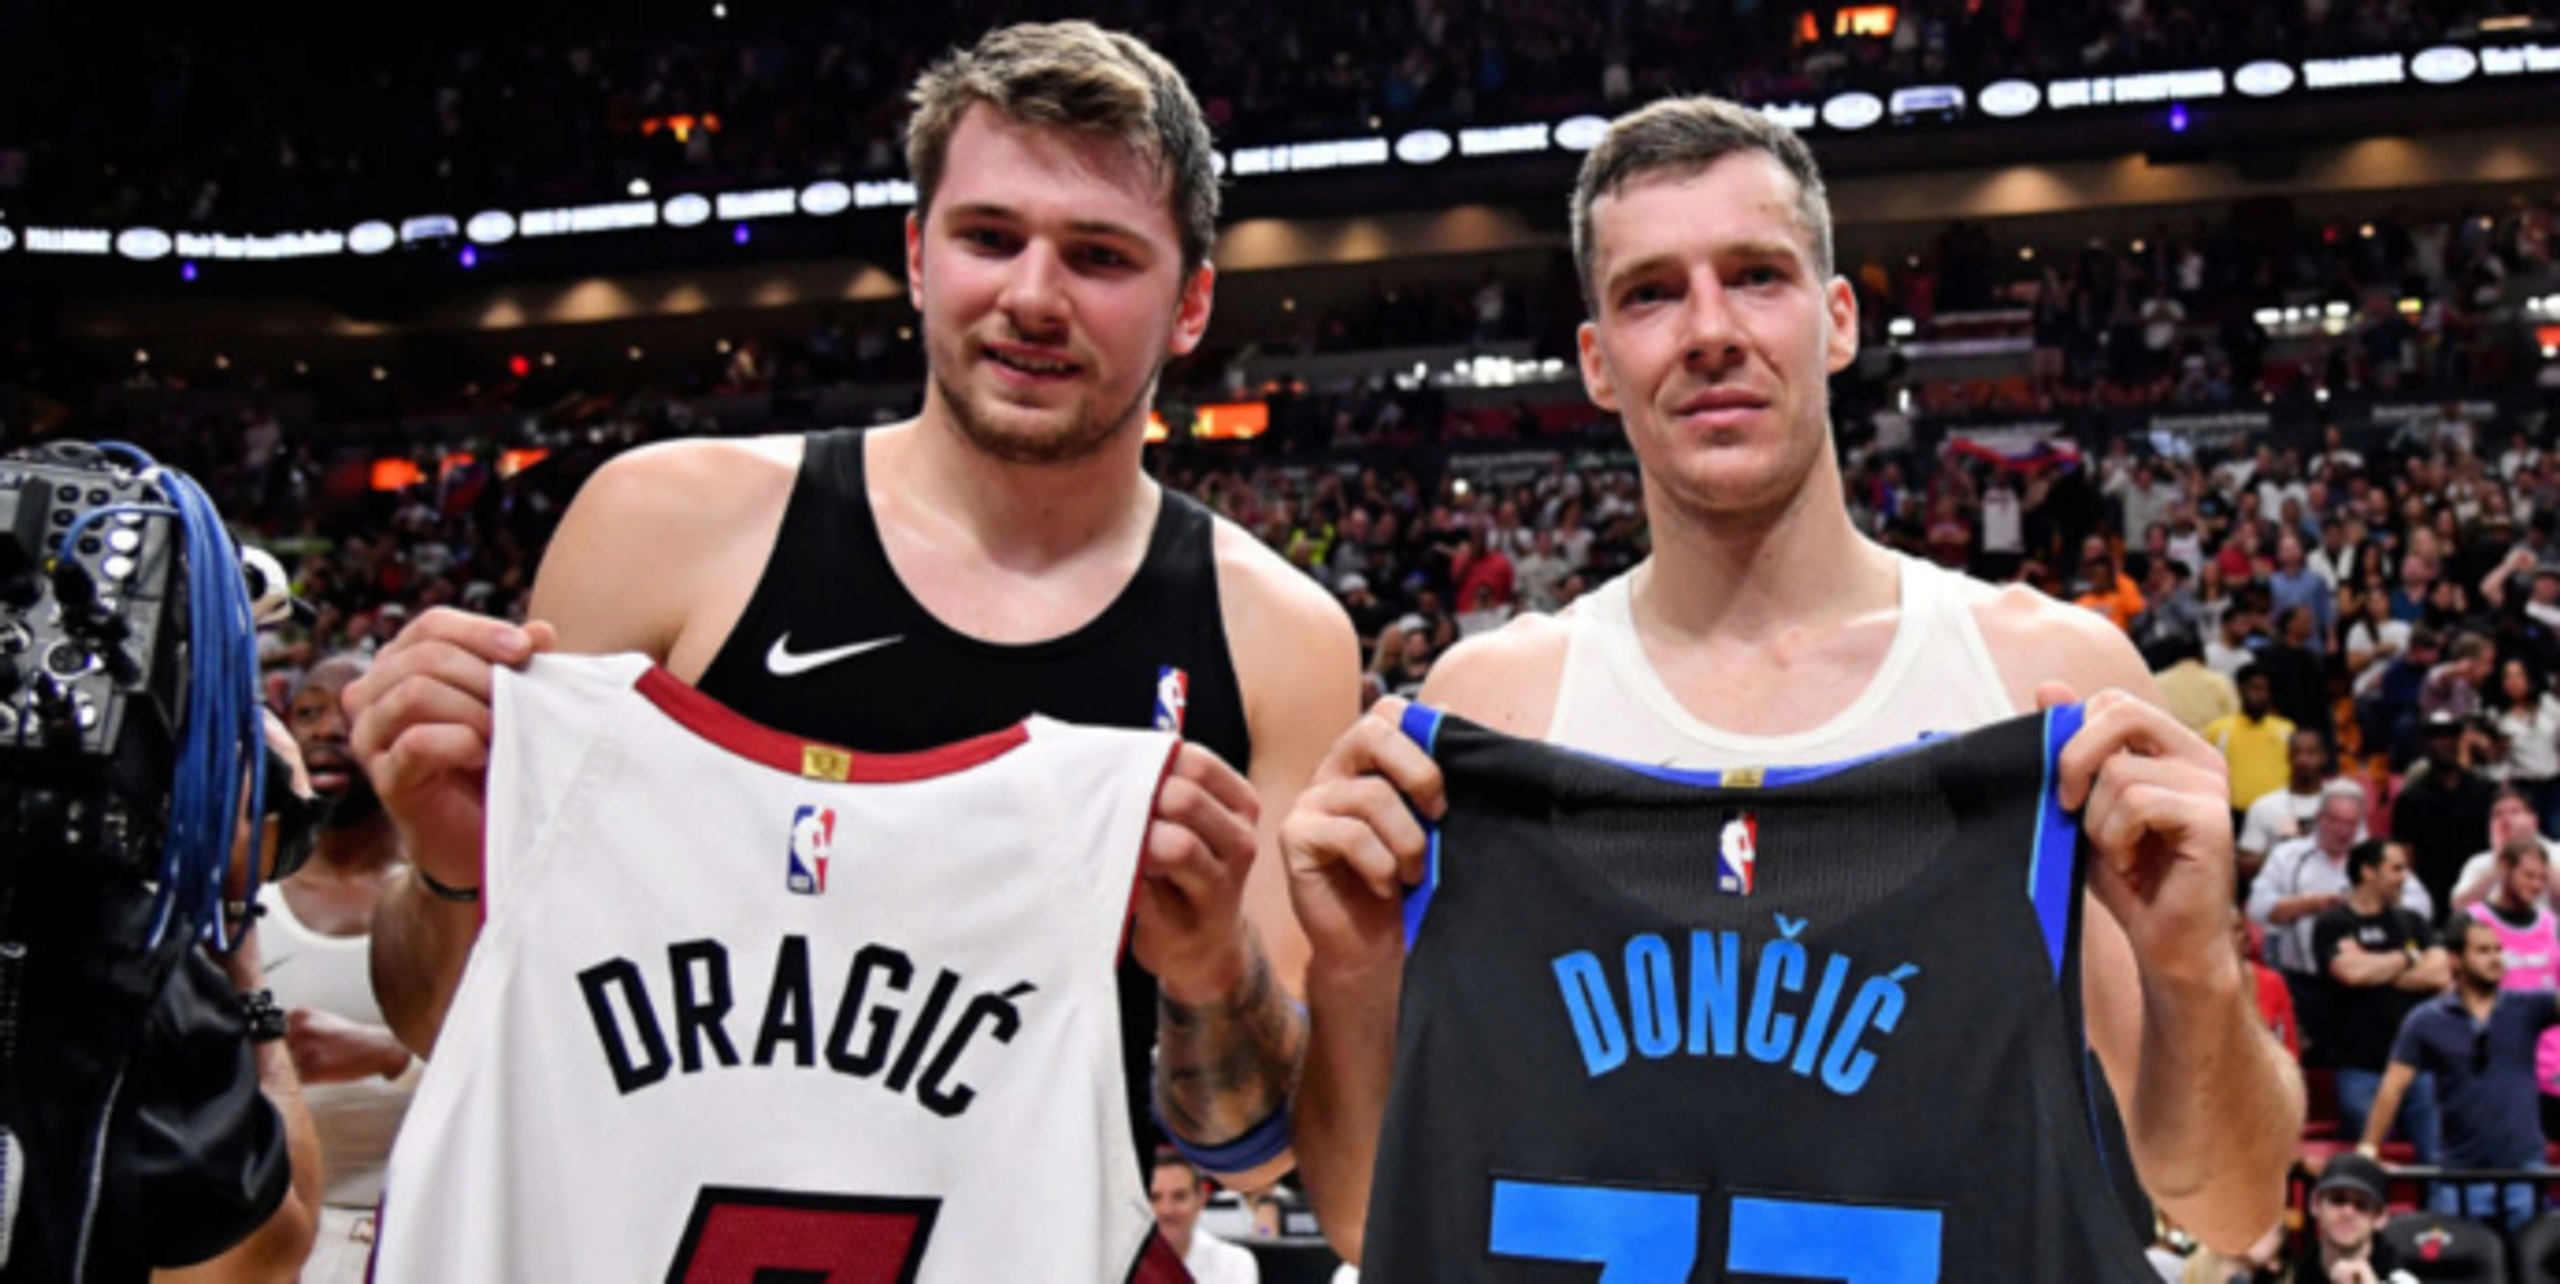 Luka Doncic evades question on Goran Dragic potentially joining Mavs